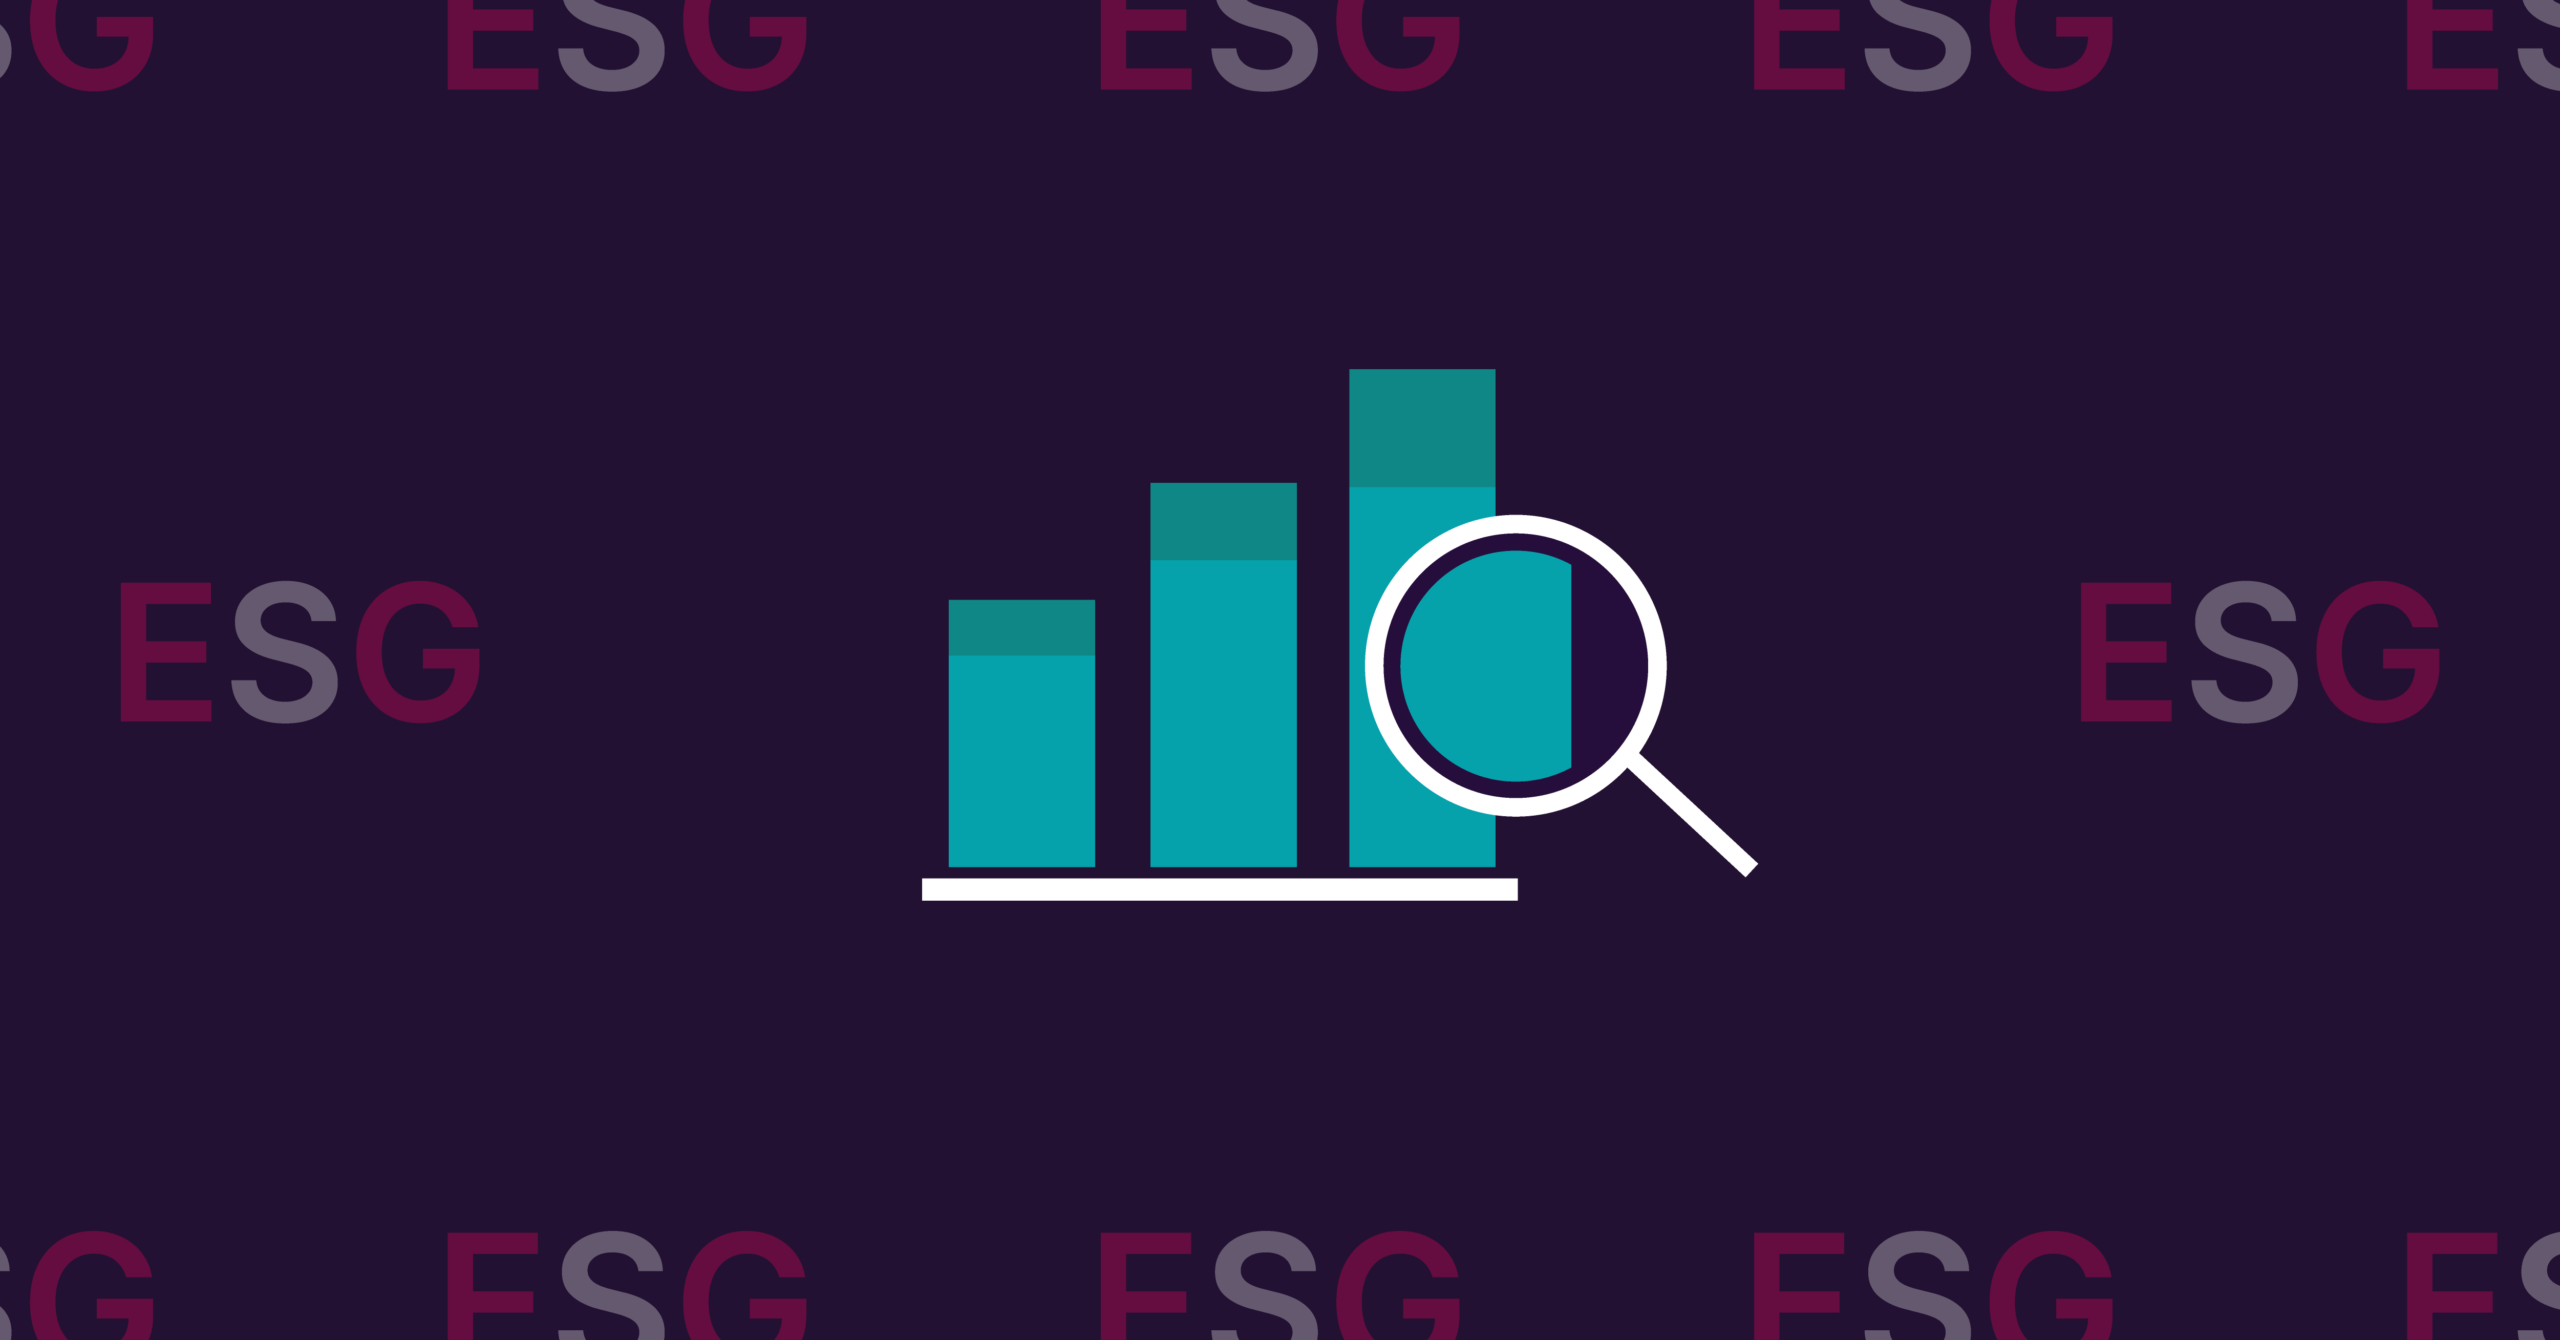 What is the S in ESG?